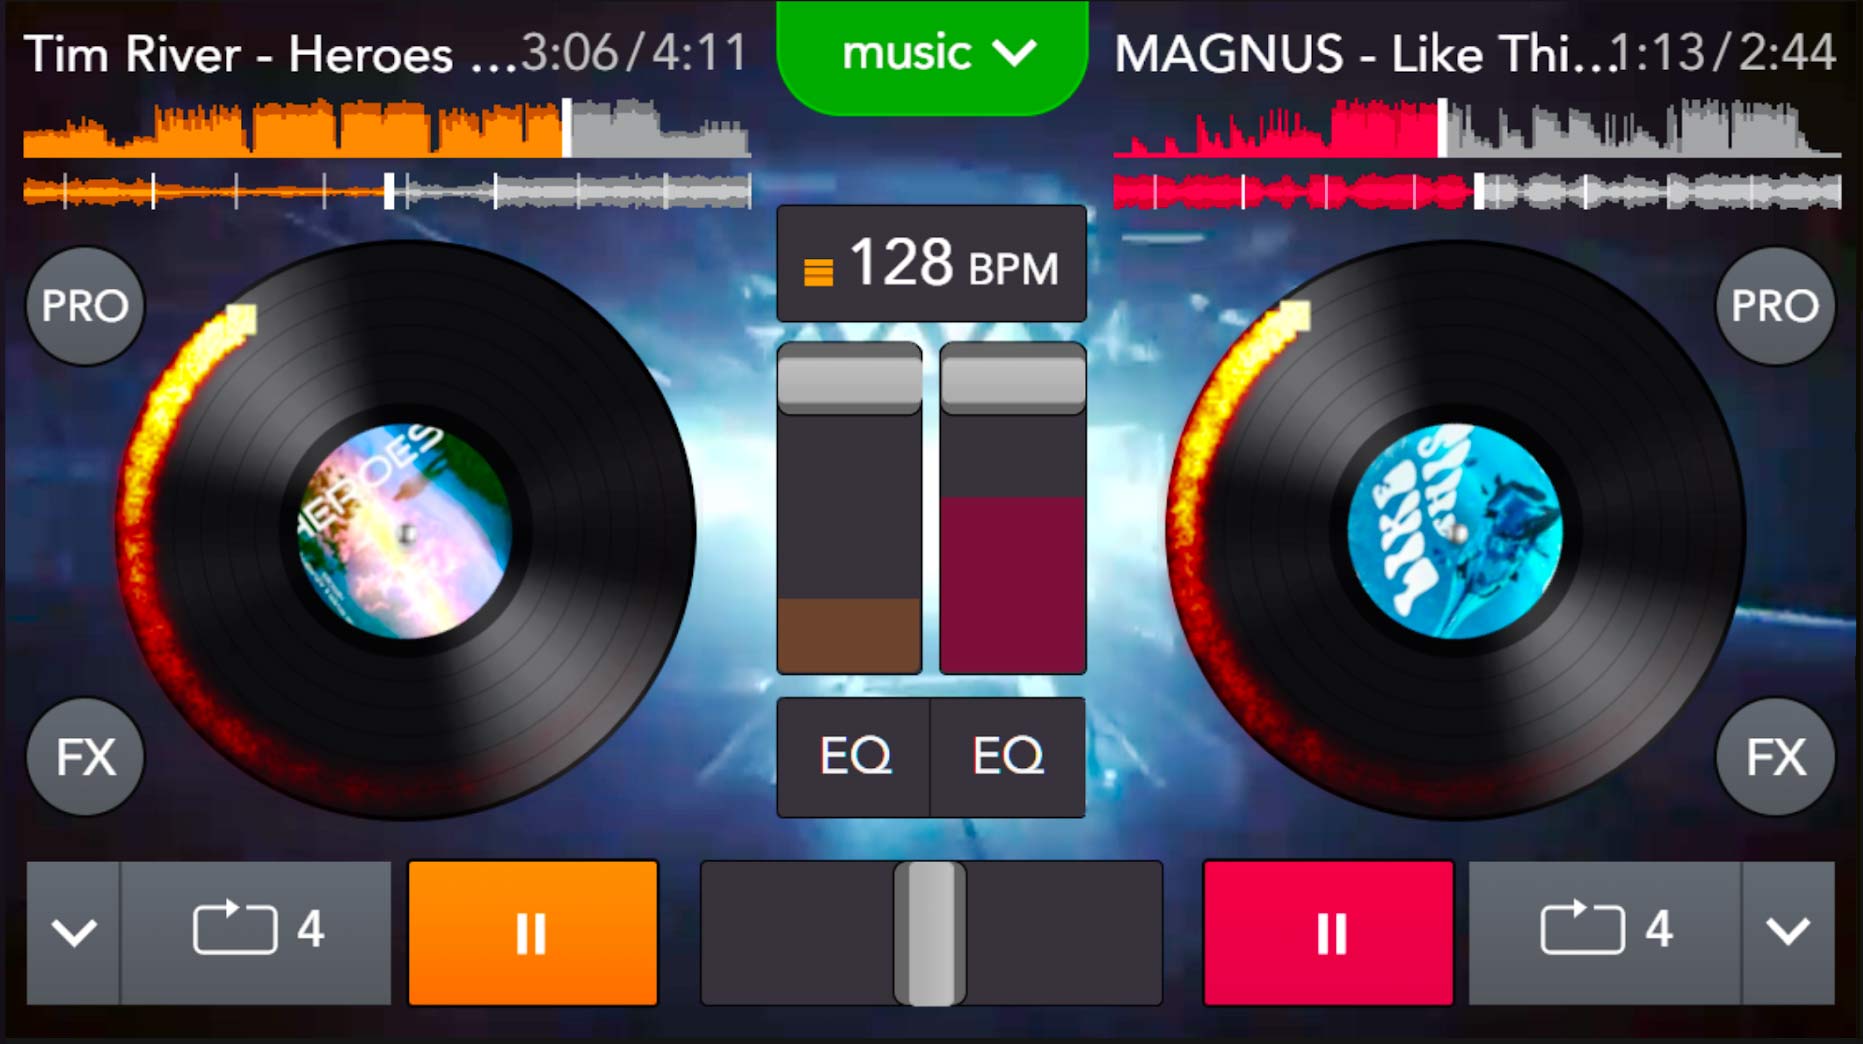 YouDJ mobile app for iOS and Android